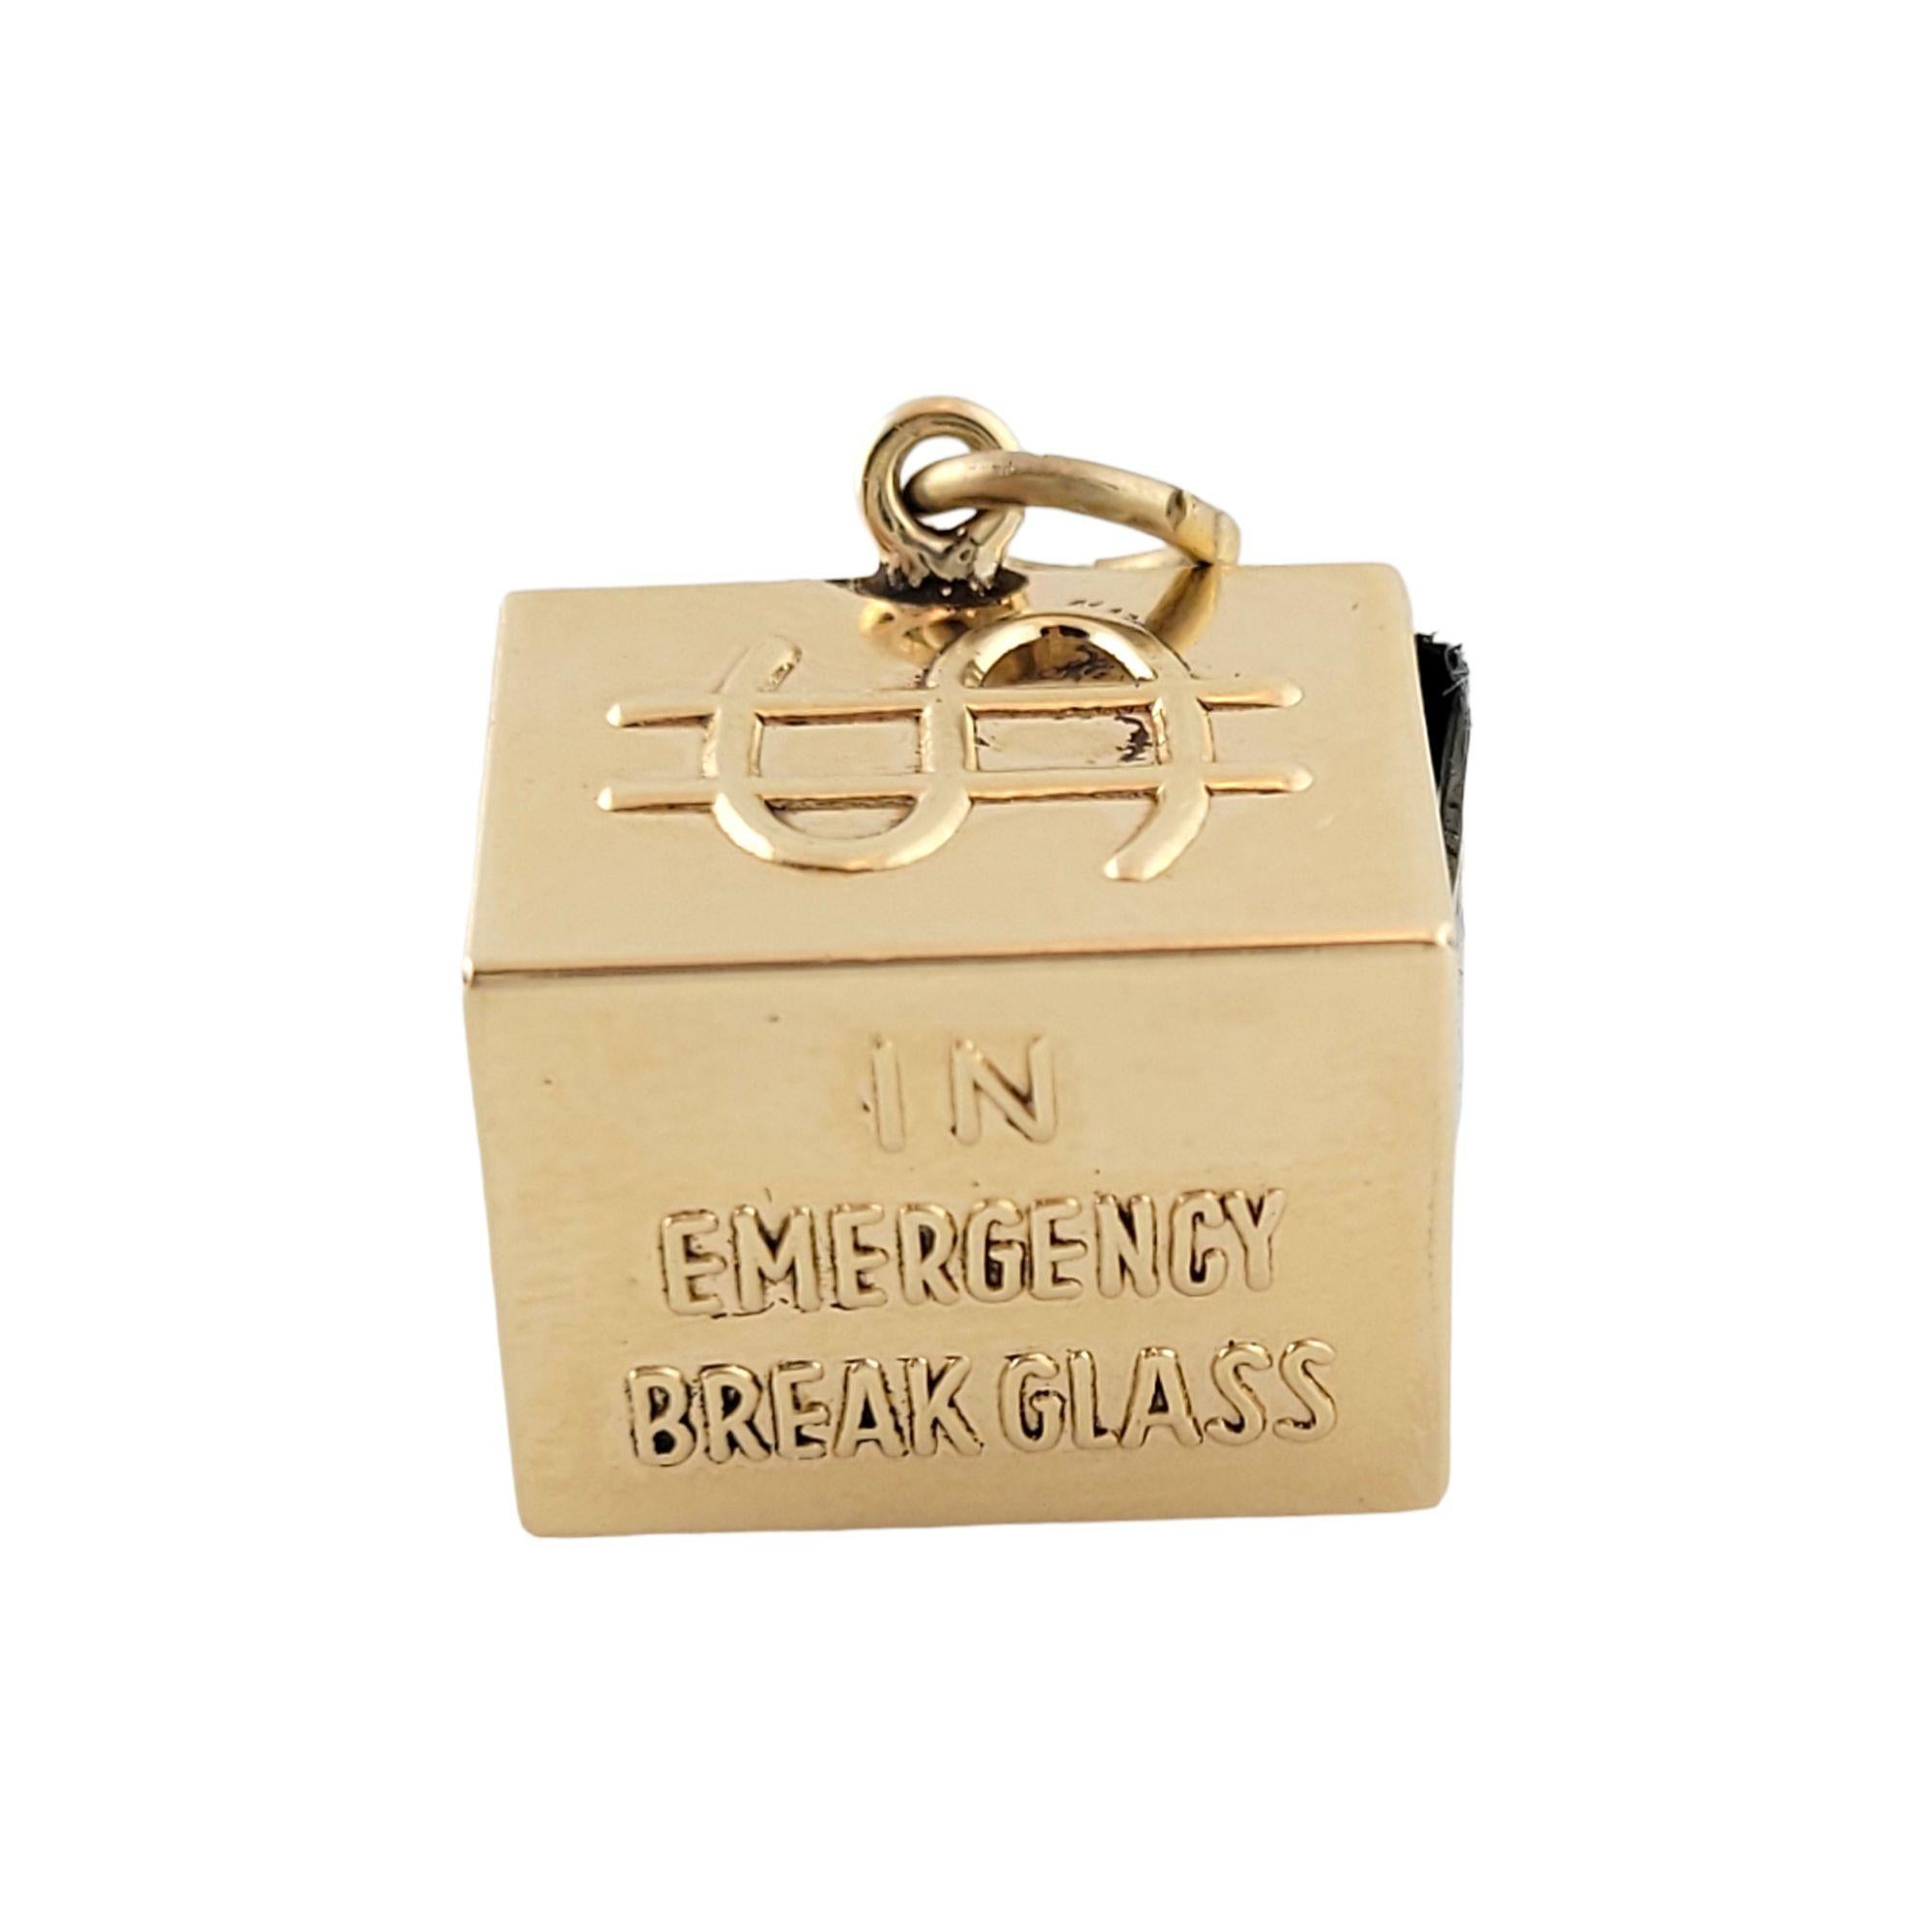 Vintage 14K Yellow Gold Mad Money Box Charm

Adorable mad money box charm made from 14K yellow gold!

Size: 14mm X 11mm X 11mm

Weight: 2.9 g/ 1.8 dwt

Tested 14K

Very good condition, professionally polished.

Will come packaged in a gift box or